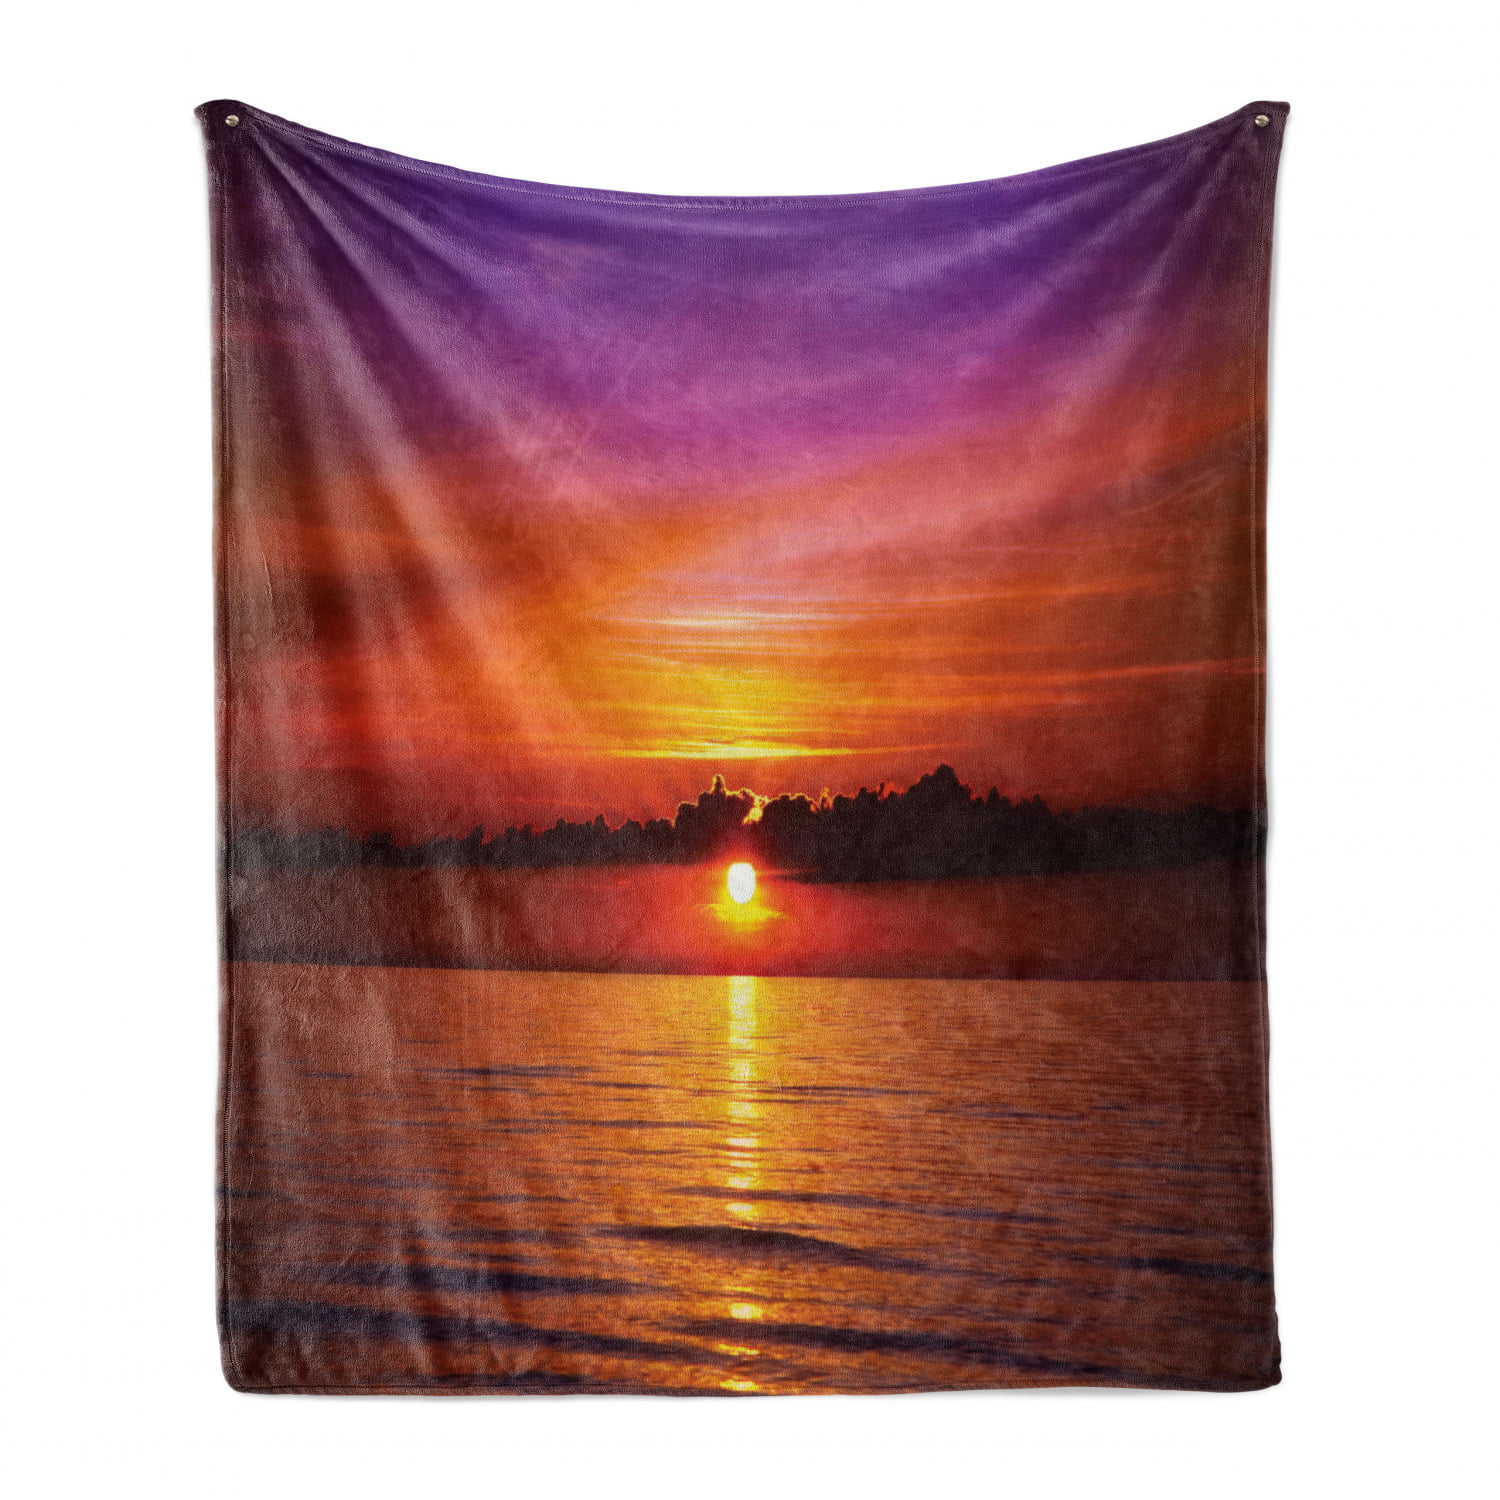 Moslion Soft Cozy Throw Blanket Sunset Surf Waves Ocean Beach Fuzzy Couch/Bed Blanket for Adult/Youth Polyester 30 X 40 Inches Home/Travel/Camping Applicable